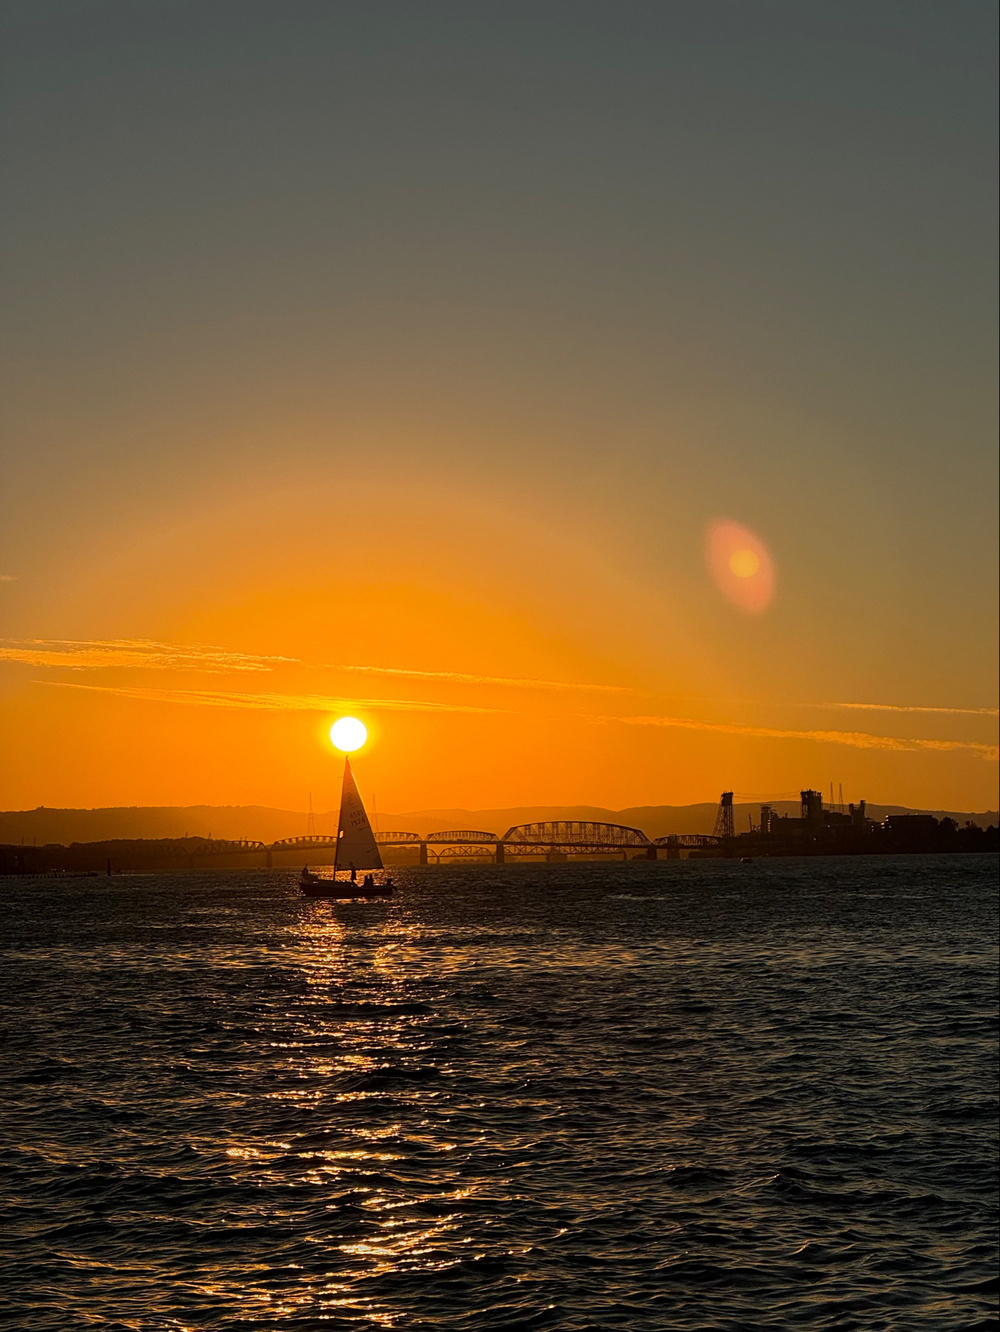 A sailboat on a body of water during sunset with the sun near the horizon. The sky is a mix of orange and yellow hues, with the sunlight reflecting off the water. There is a bridge and industrial structures visible in the background.